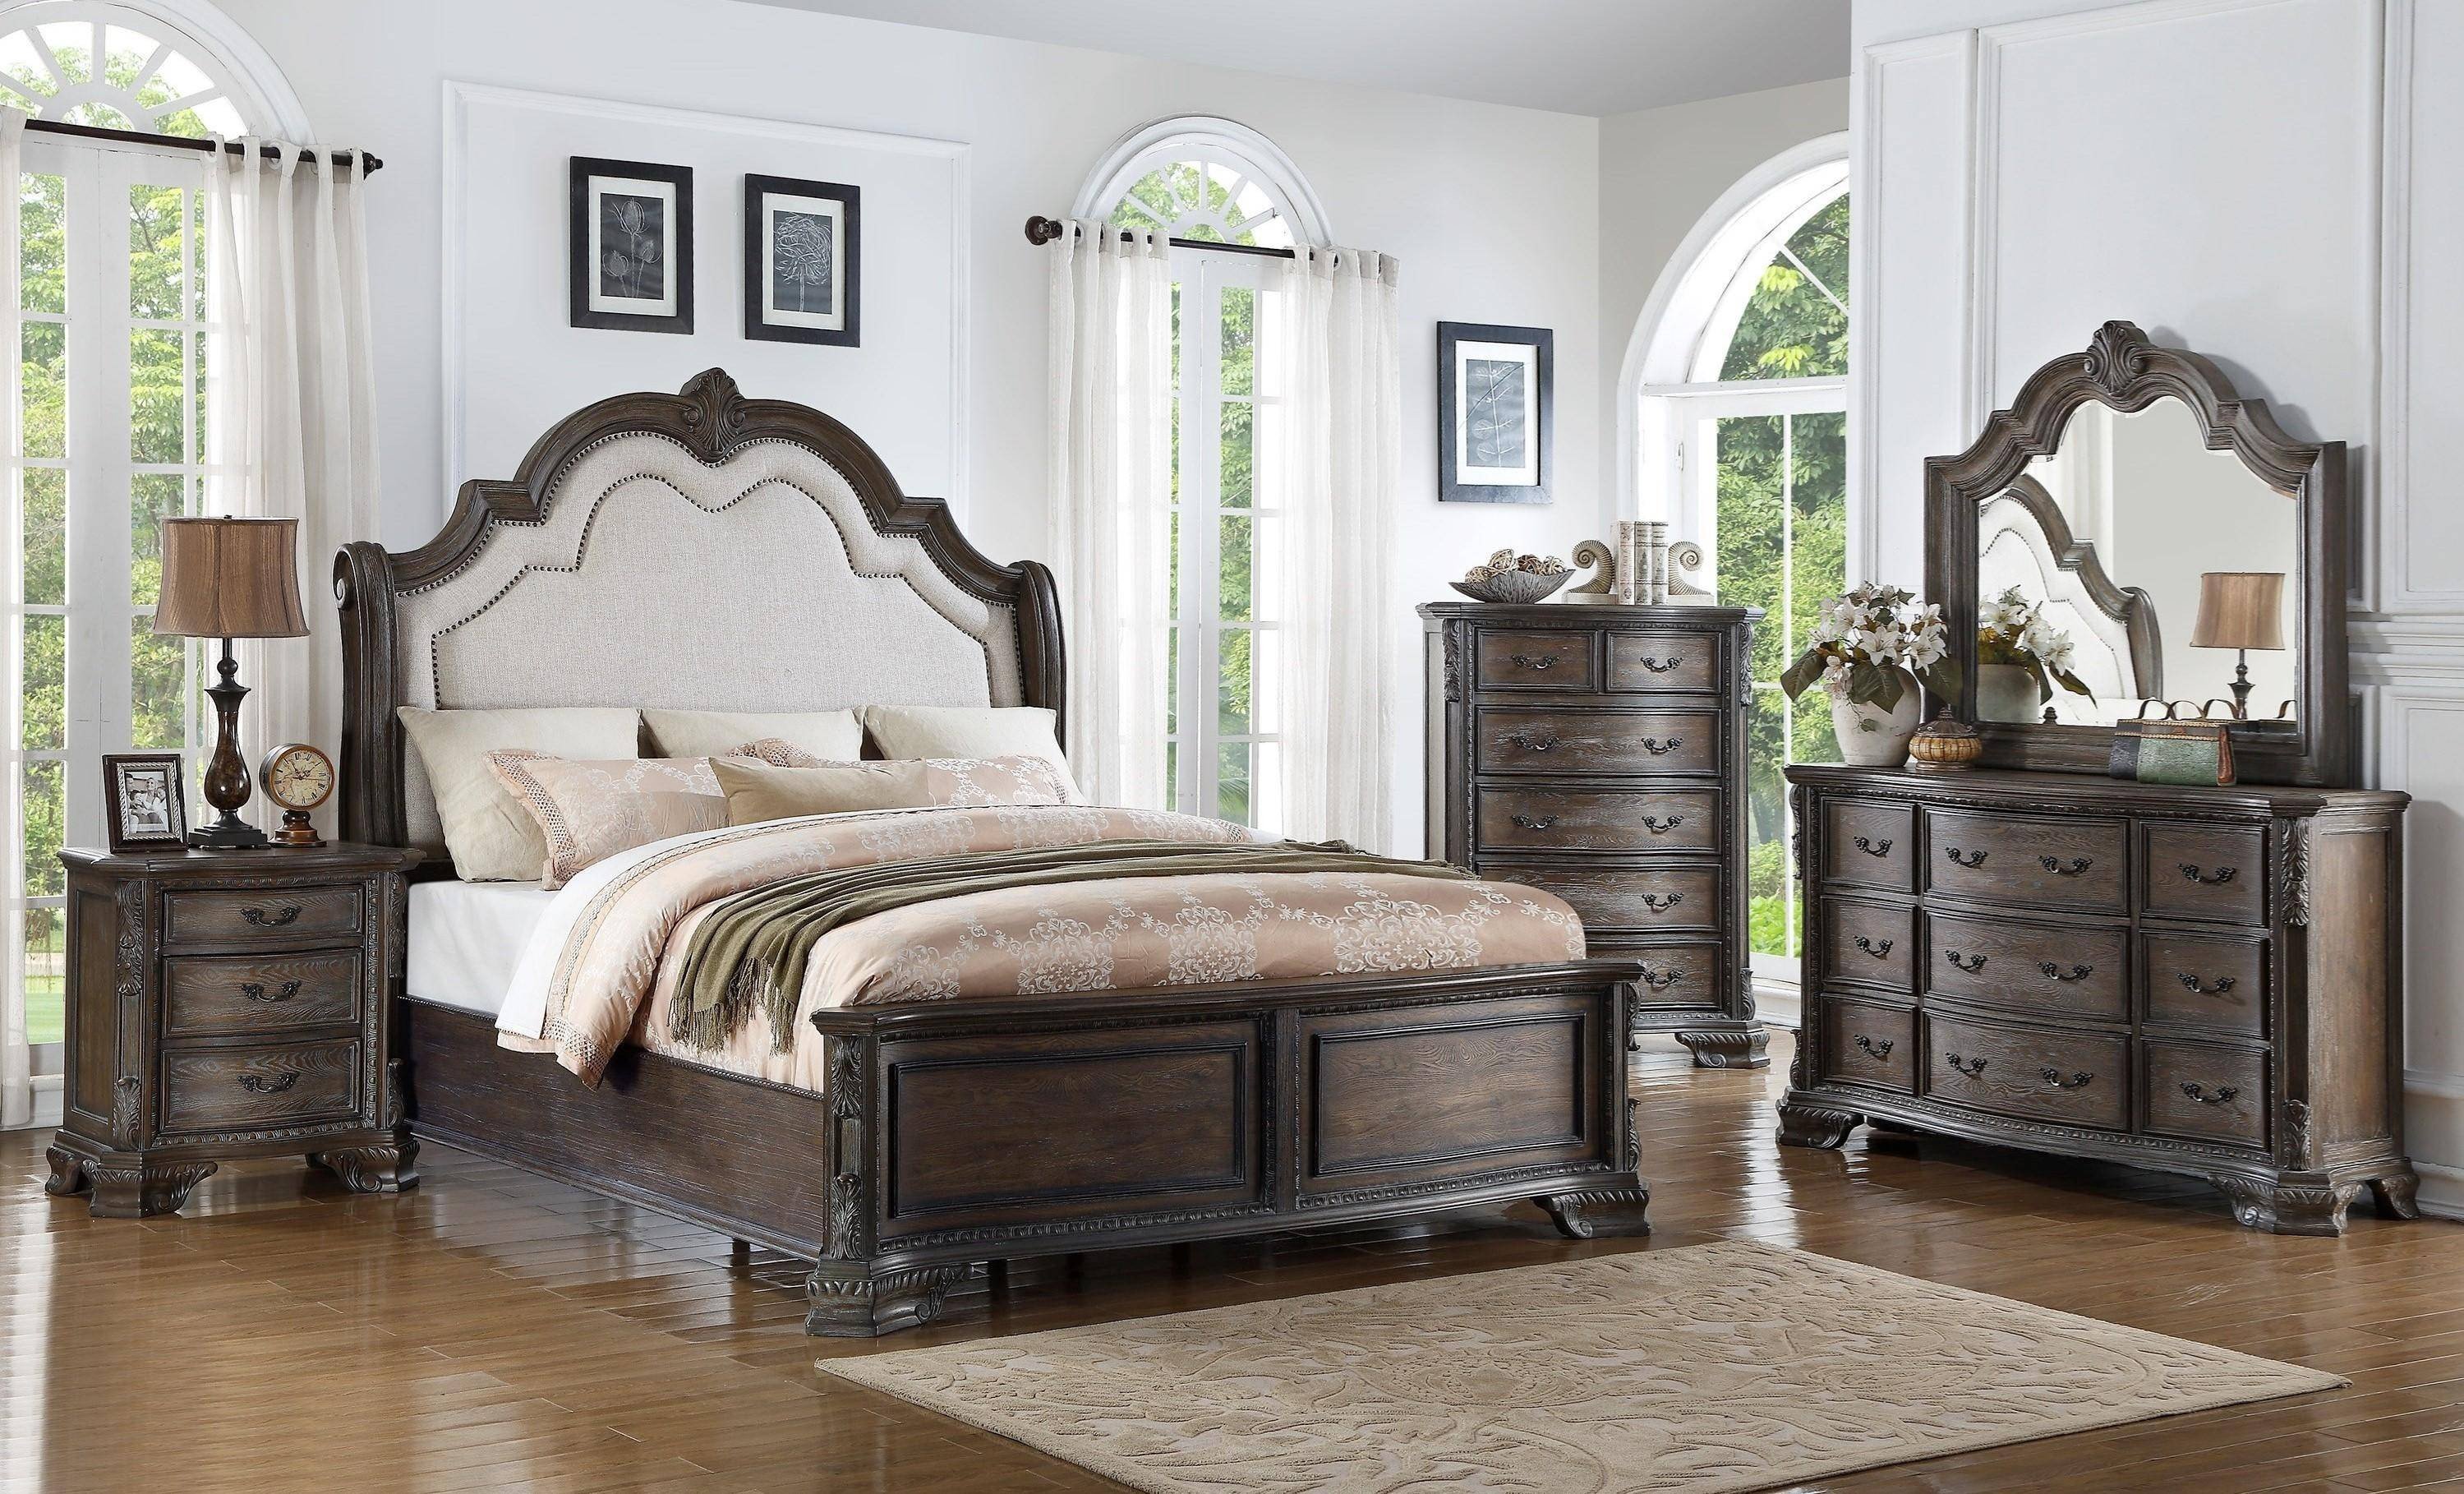 Solid Oak Bedroom Furniture New Crown Mark B1120 Sheffield Queen Panel Bed In Gray Fabric